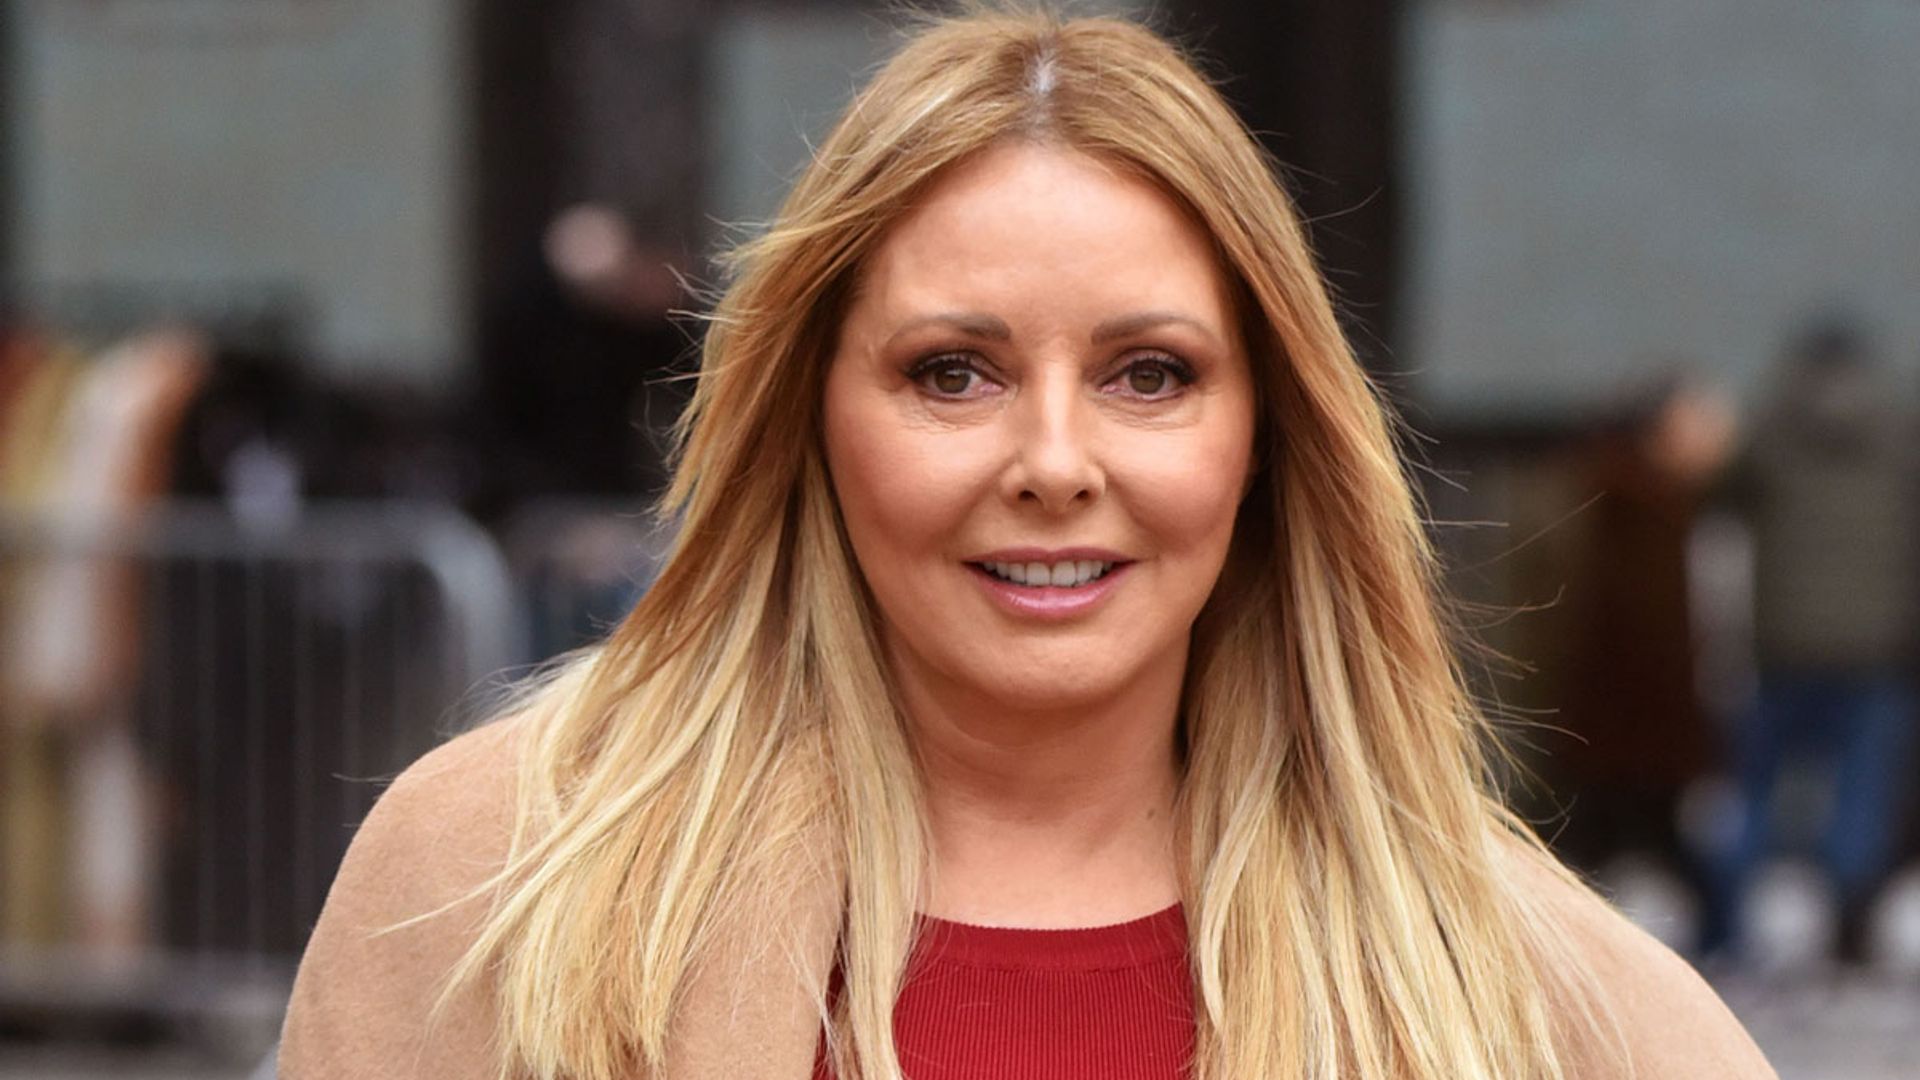 Carol Vorderman Looks Unreal In Curve Hugging Dress To Announce Exciting News Hello